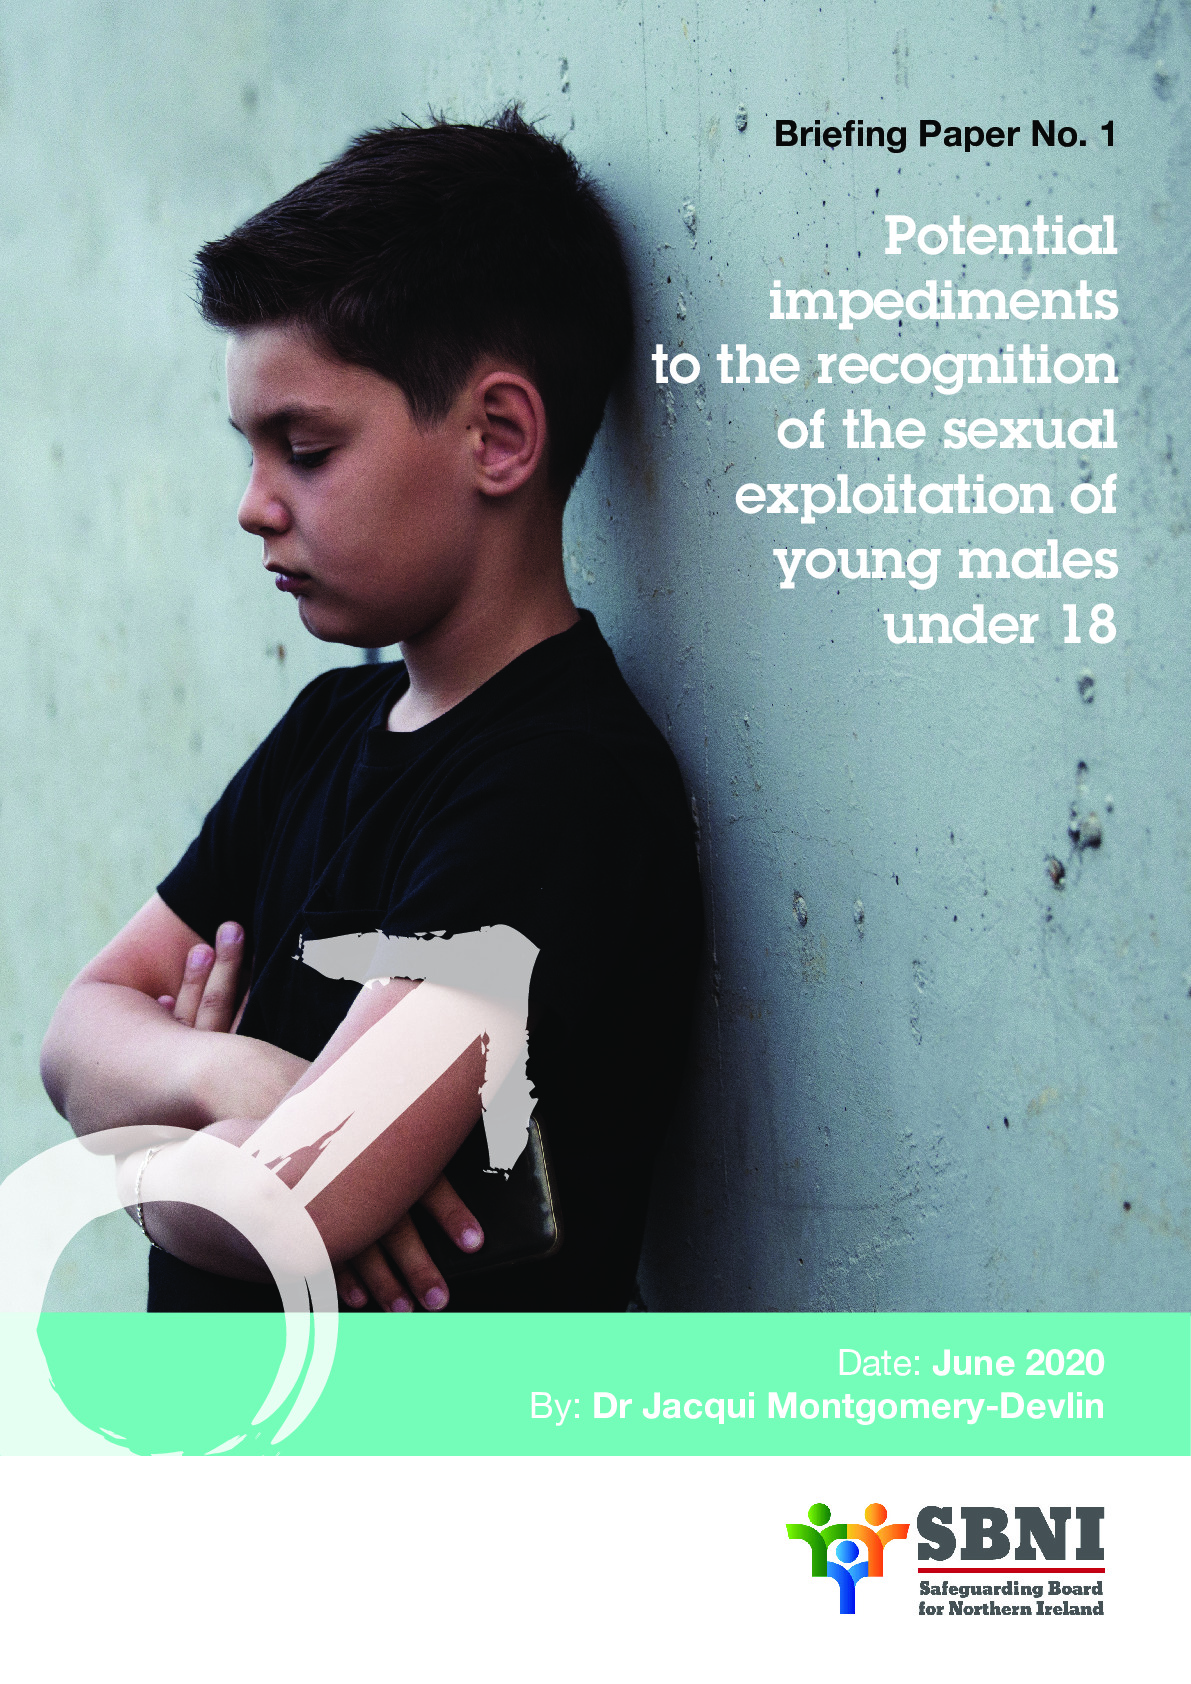 Briefing paper No. 1 - Potential impediments to the recognition of the sexual exploitation of young males under 18